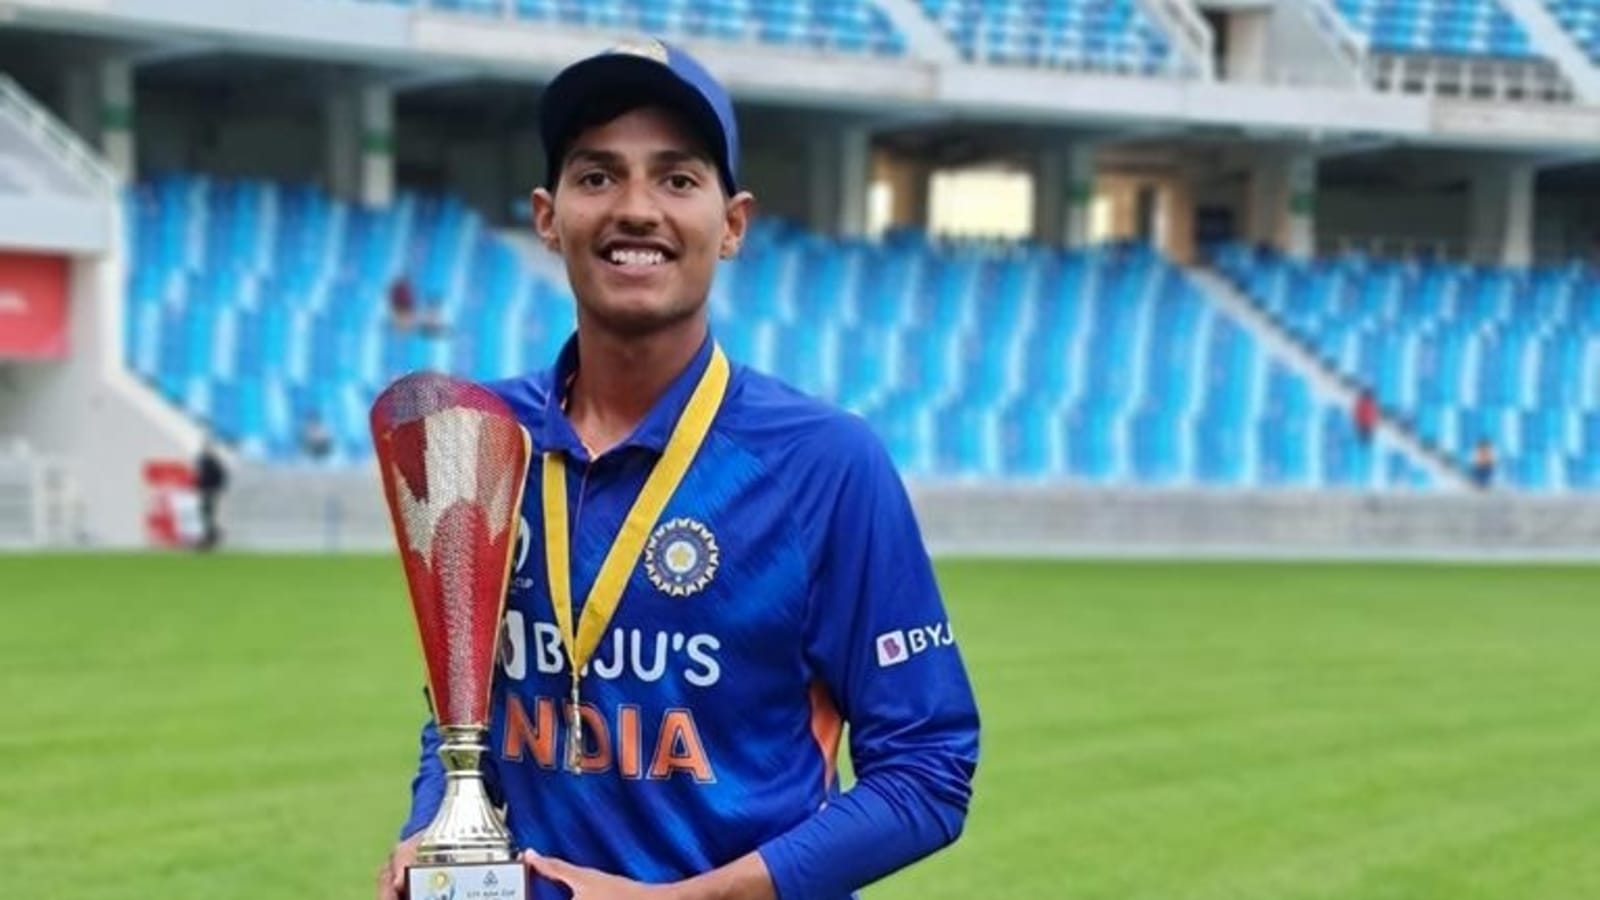 ICC U-19 World Cup 2022 All you need to know about schedule, squads, timings Cricket